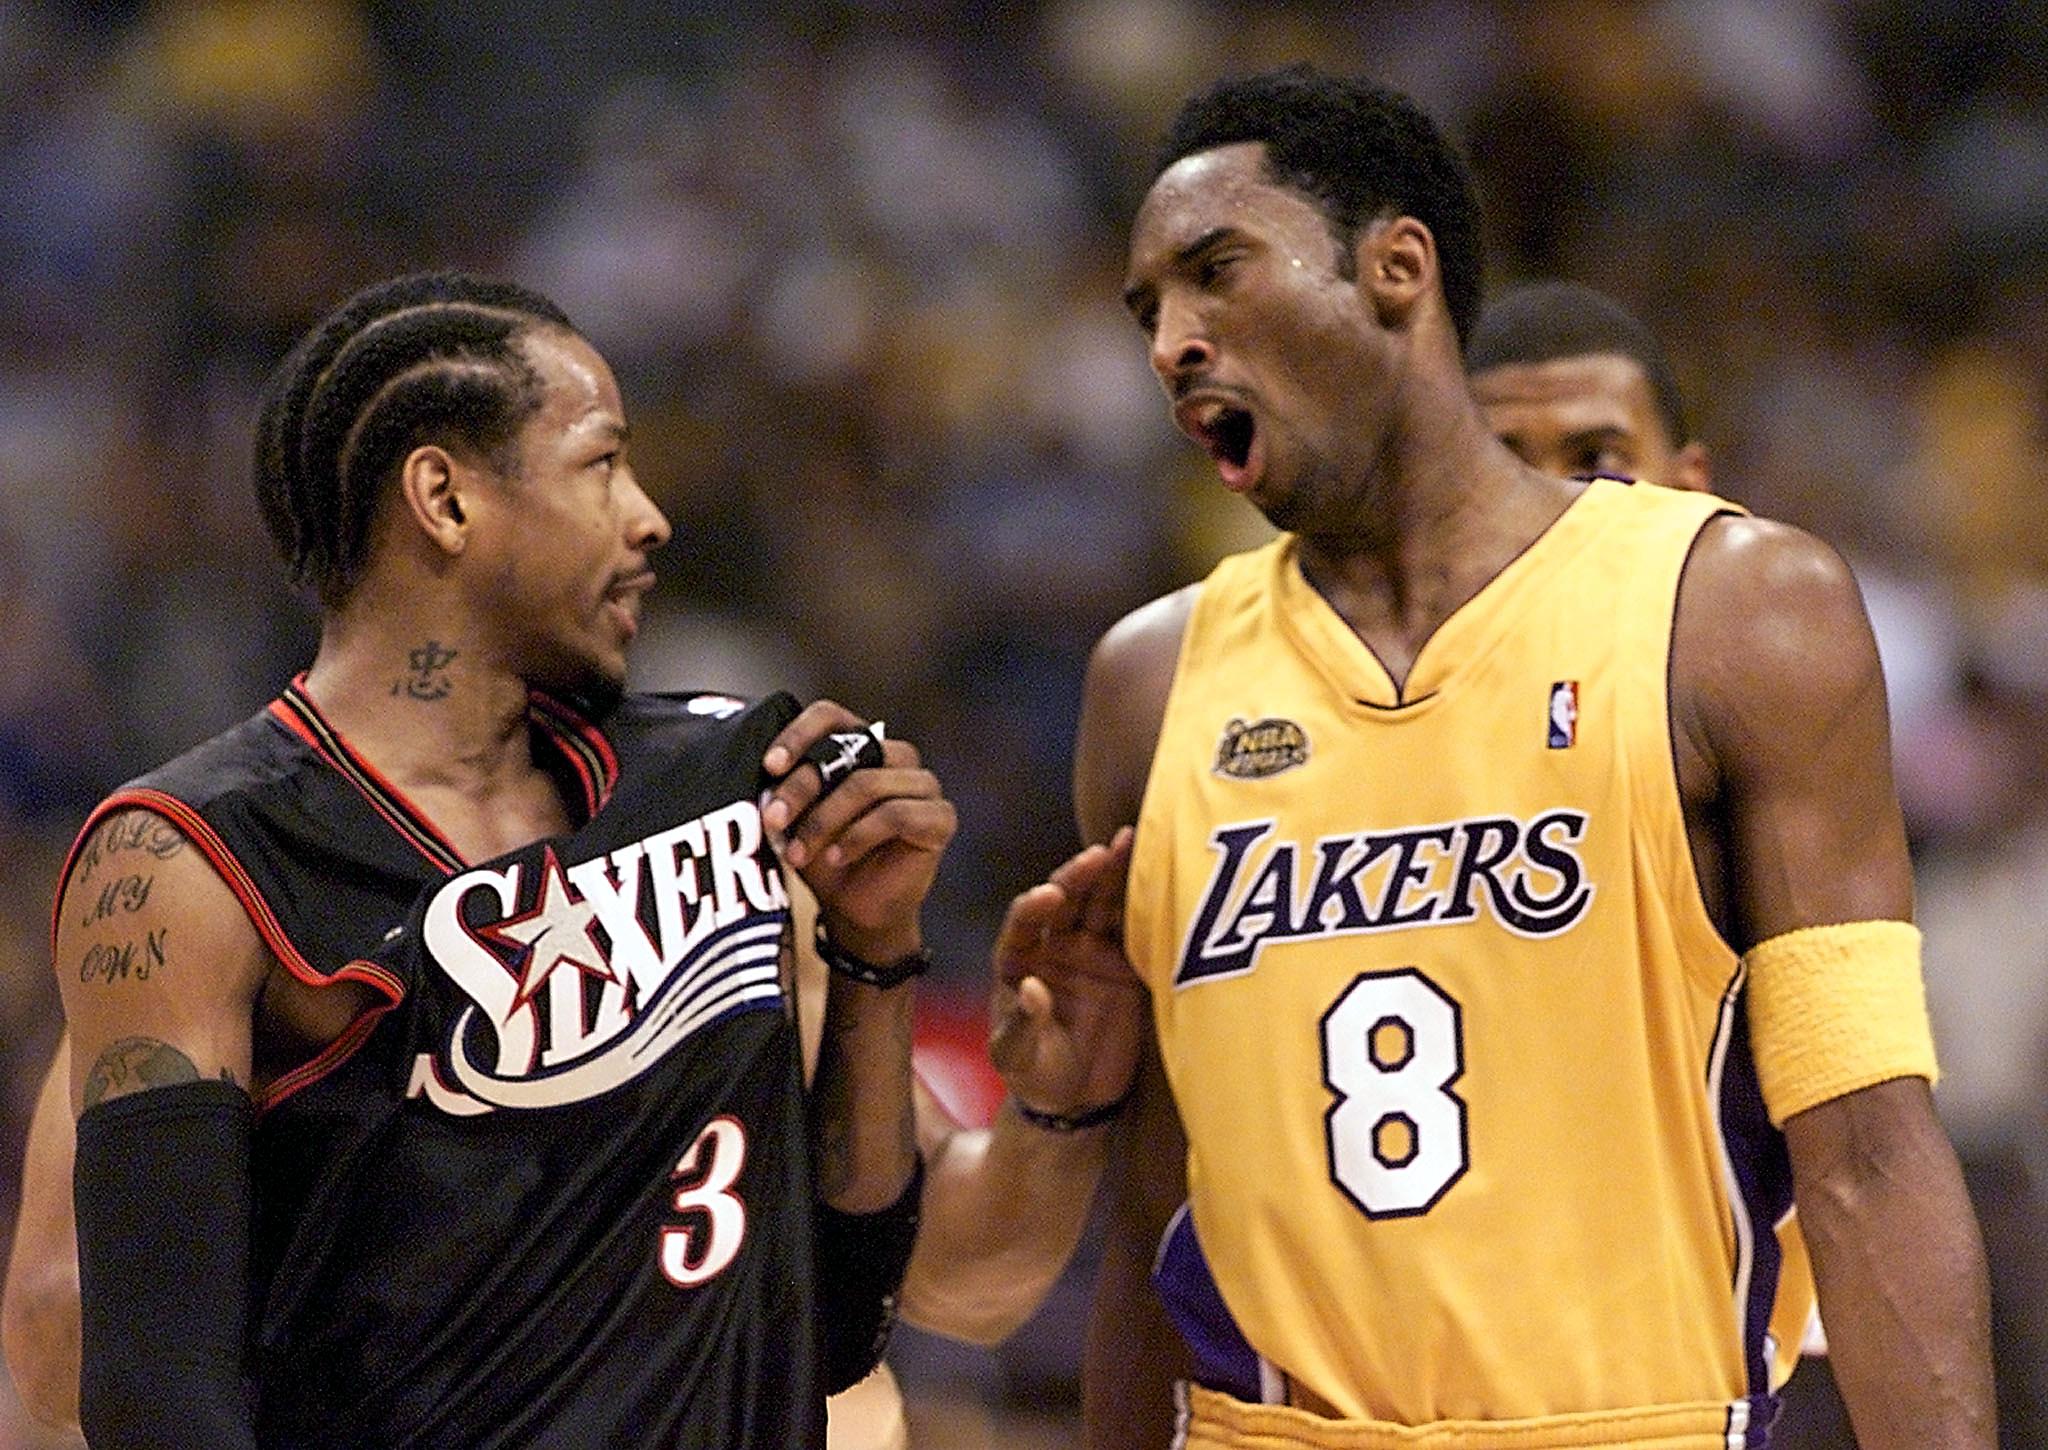 Former Philadelphia 76ers legend Allen Iverson talks to Los Angeles Lakers icon Kobe Bryant during the 2001 NBA Finals